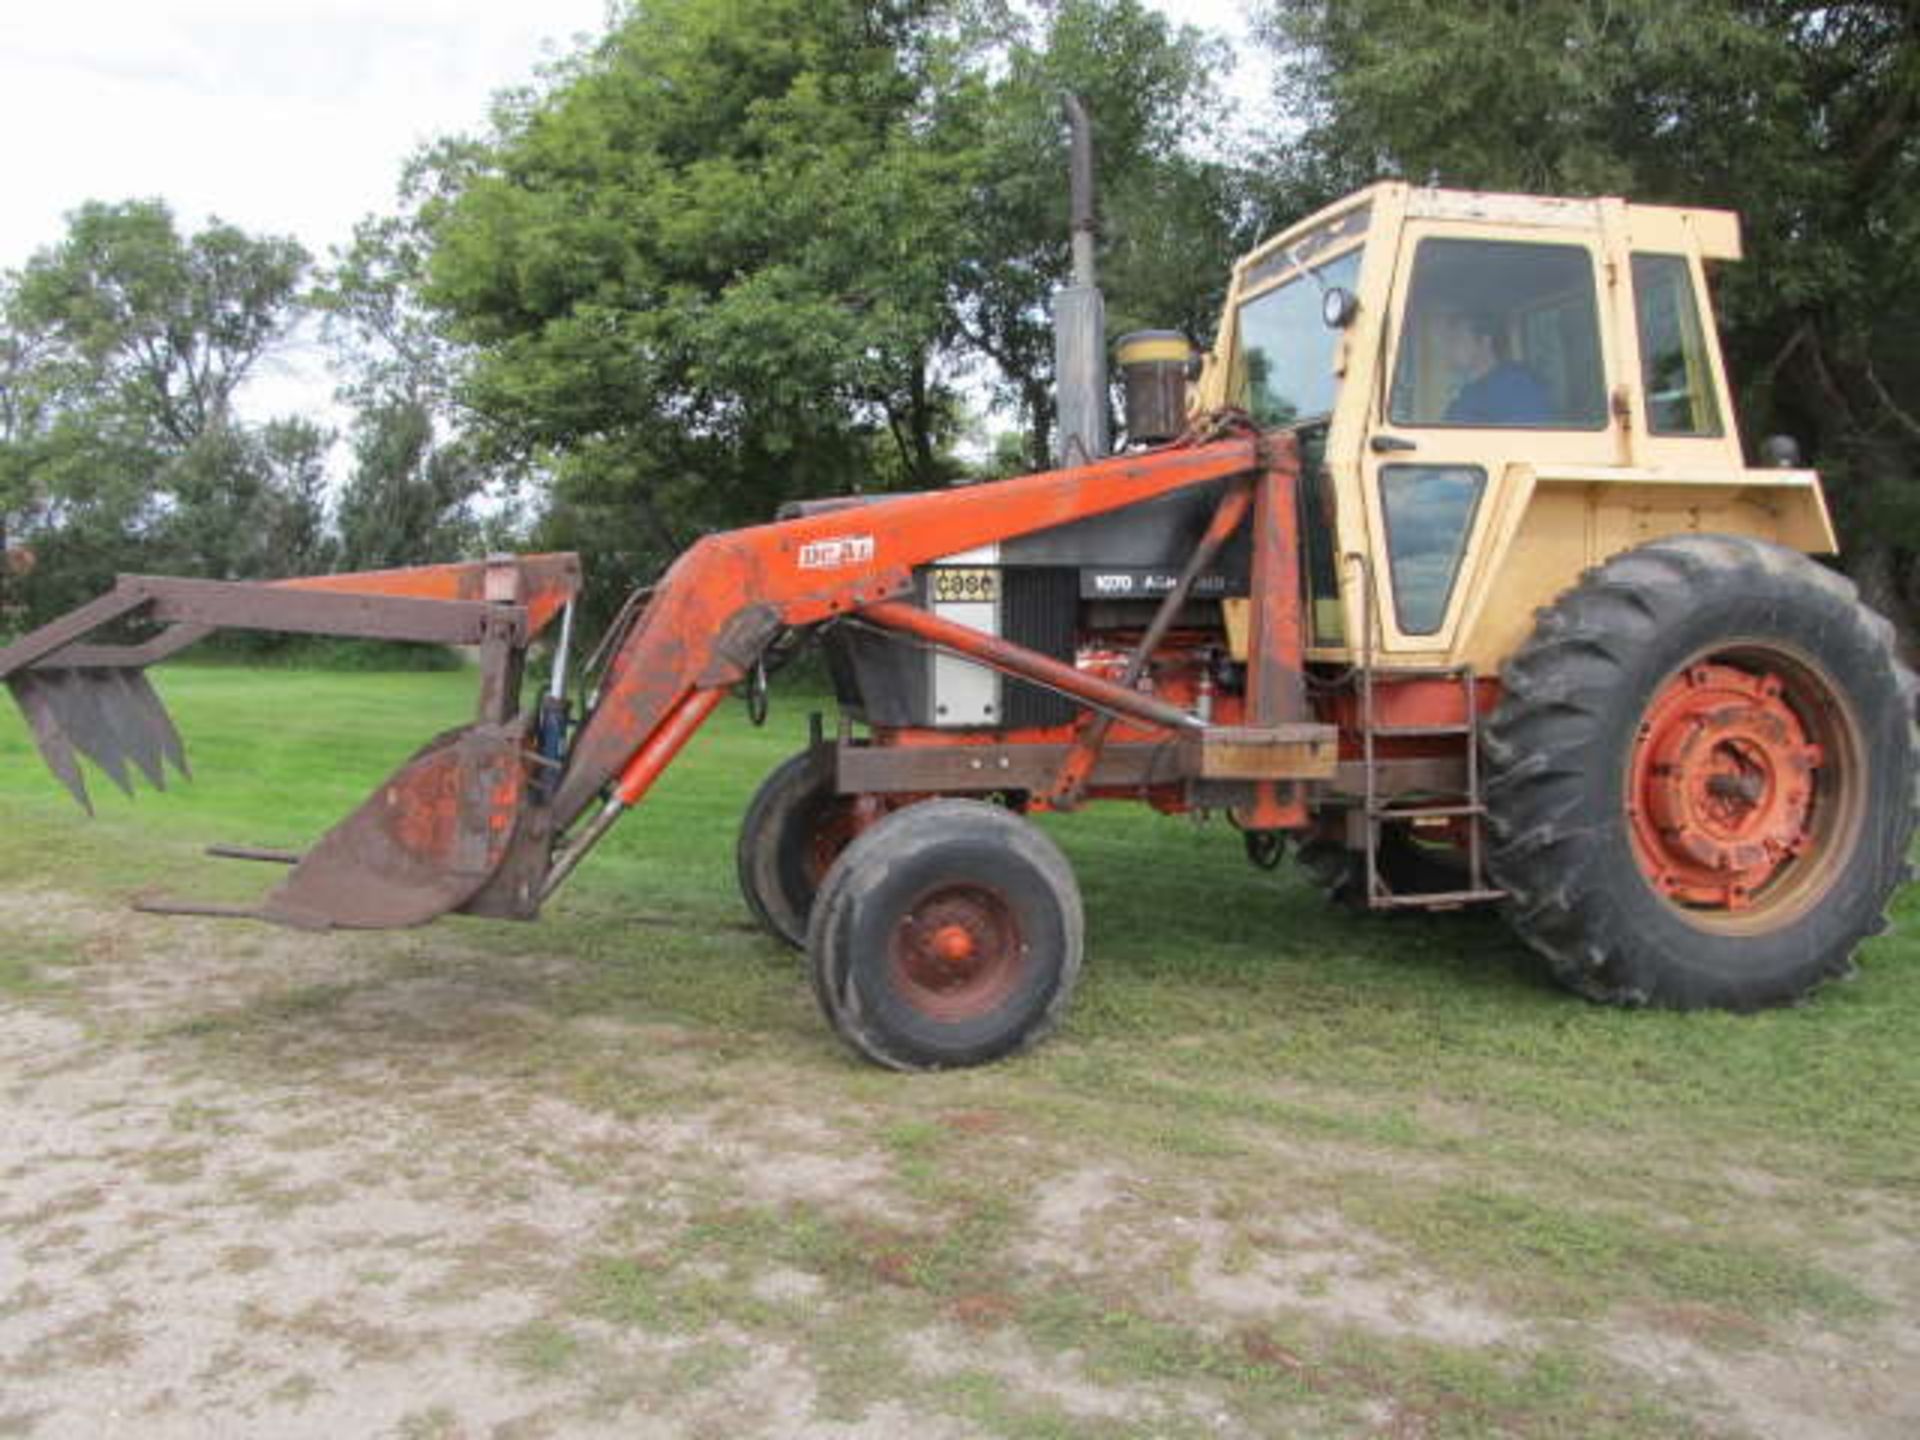 CASE 1070 AGRI-KING 2WD TRACTOR, Powershift, 2 Hydraulics, Du-All FEL & Grapple, Black, SN.8660396 - Image 2 of 5